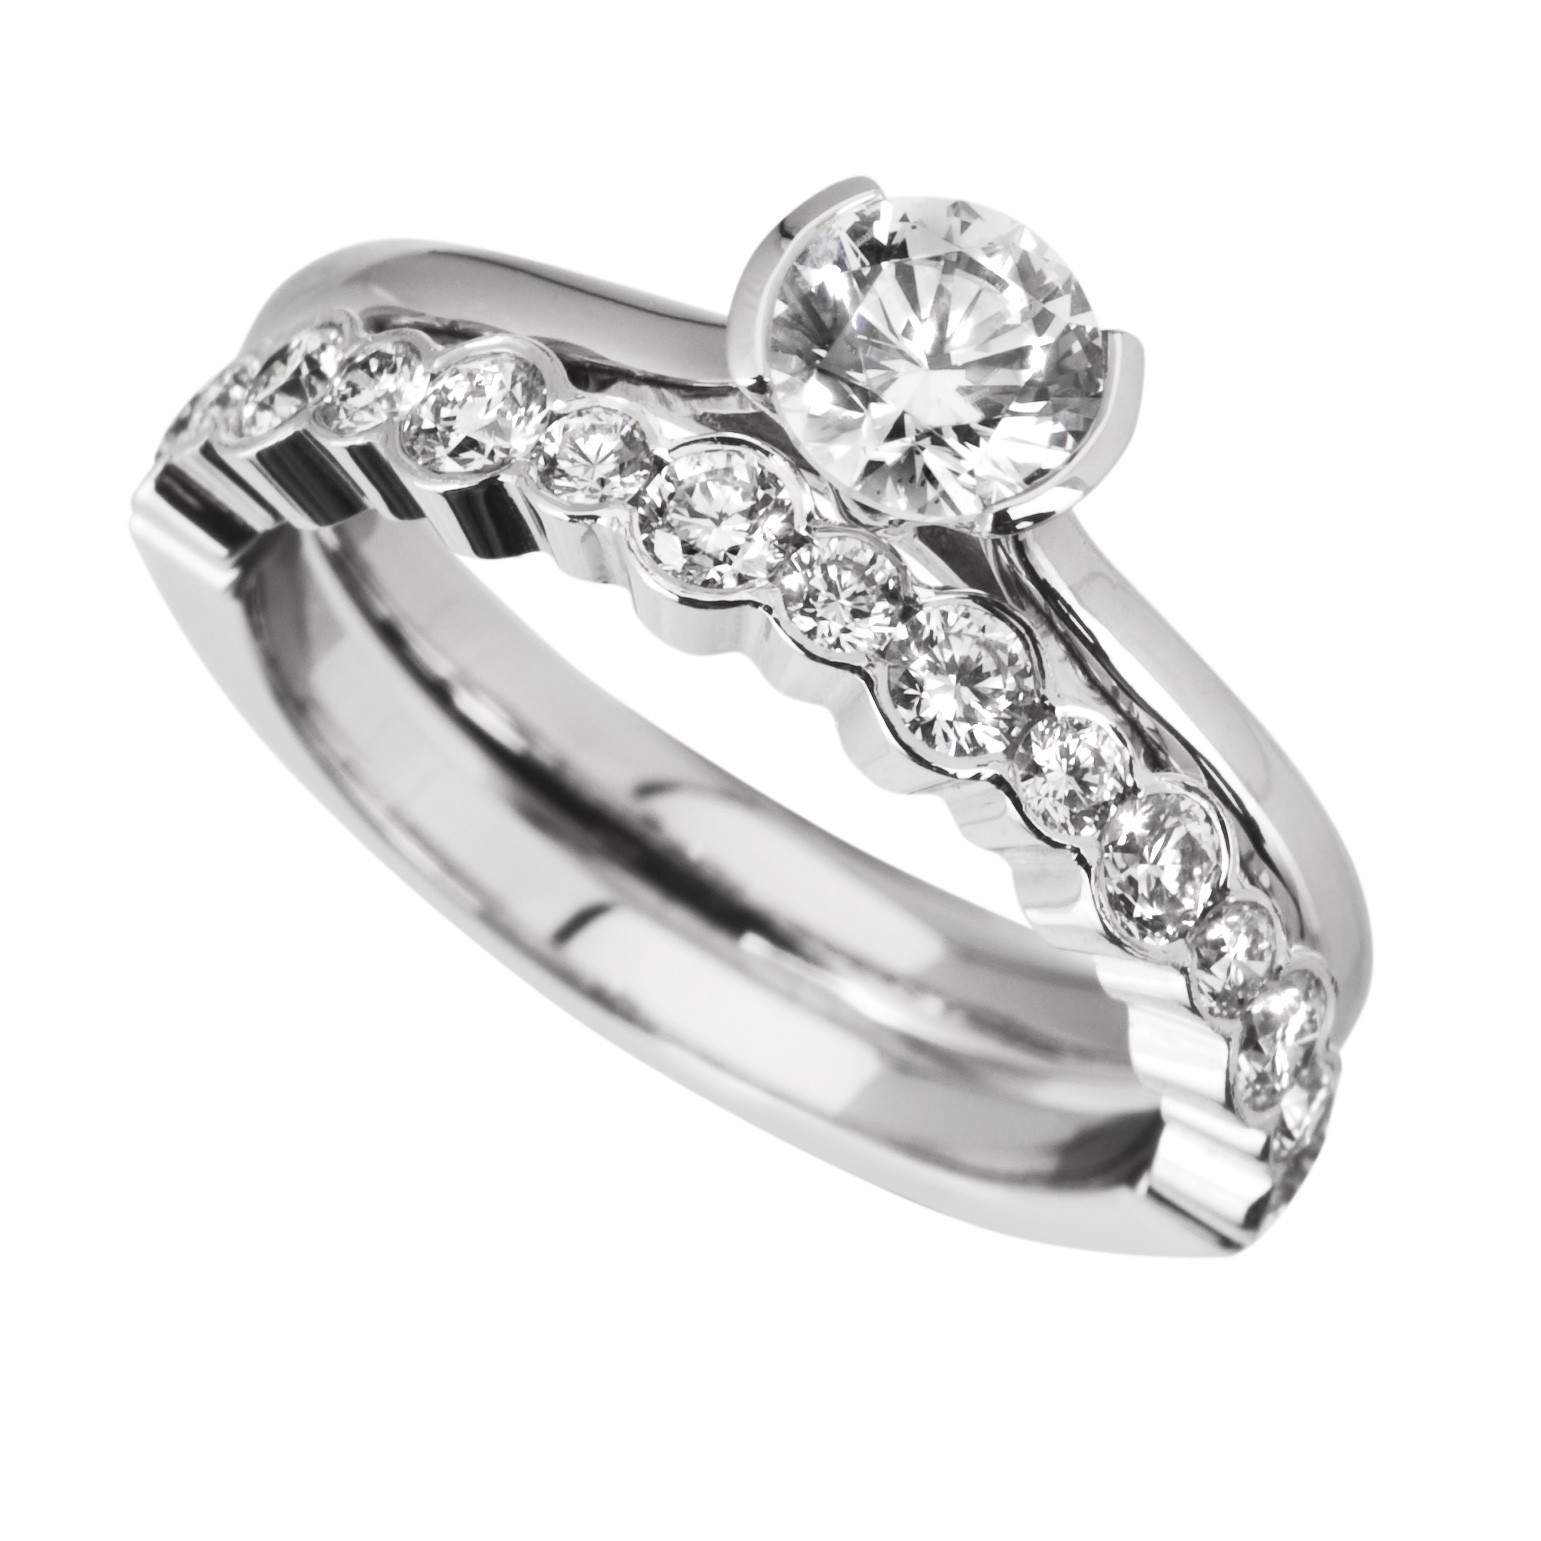 Picture Of Wedding Rings
 Diamonds and Rings the line Jeweller Launches a New